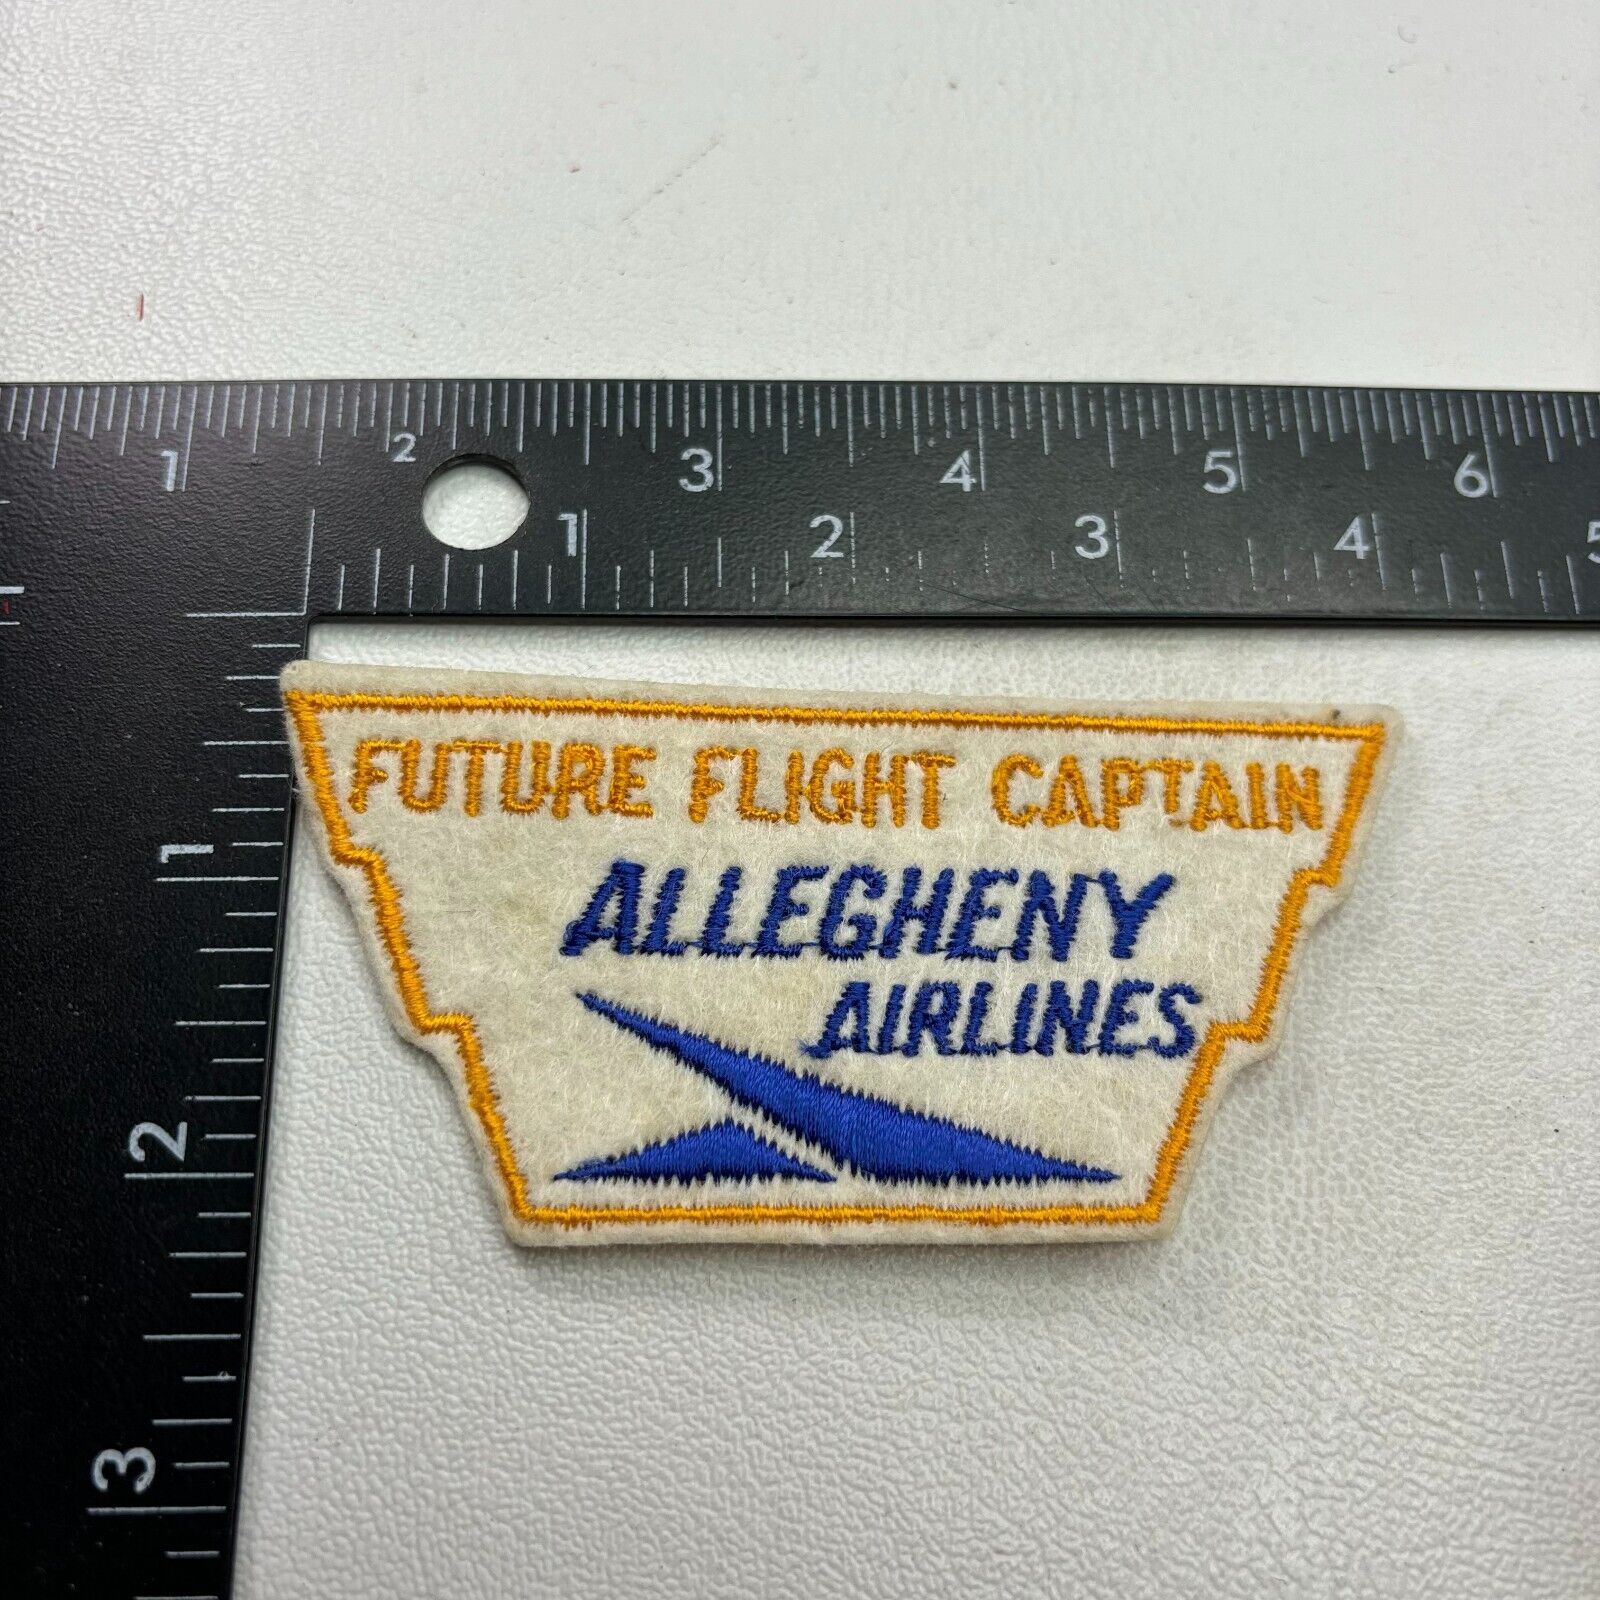 Vintage FUTURE FLIGHT CAPTAIN ALLEGHENY AIRLINES Patch (Airplane Related) O41G